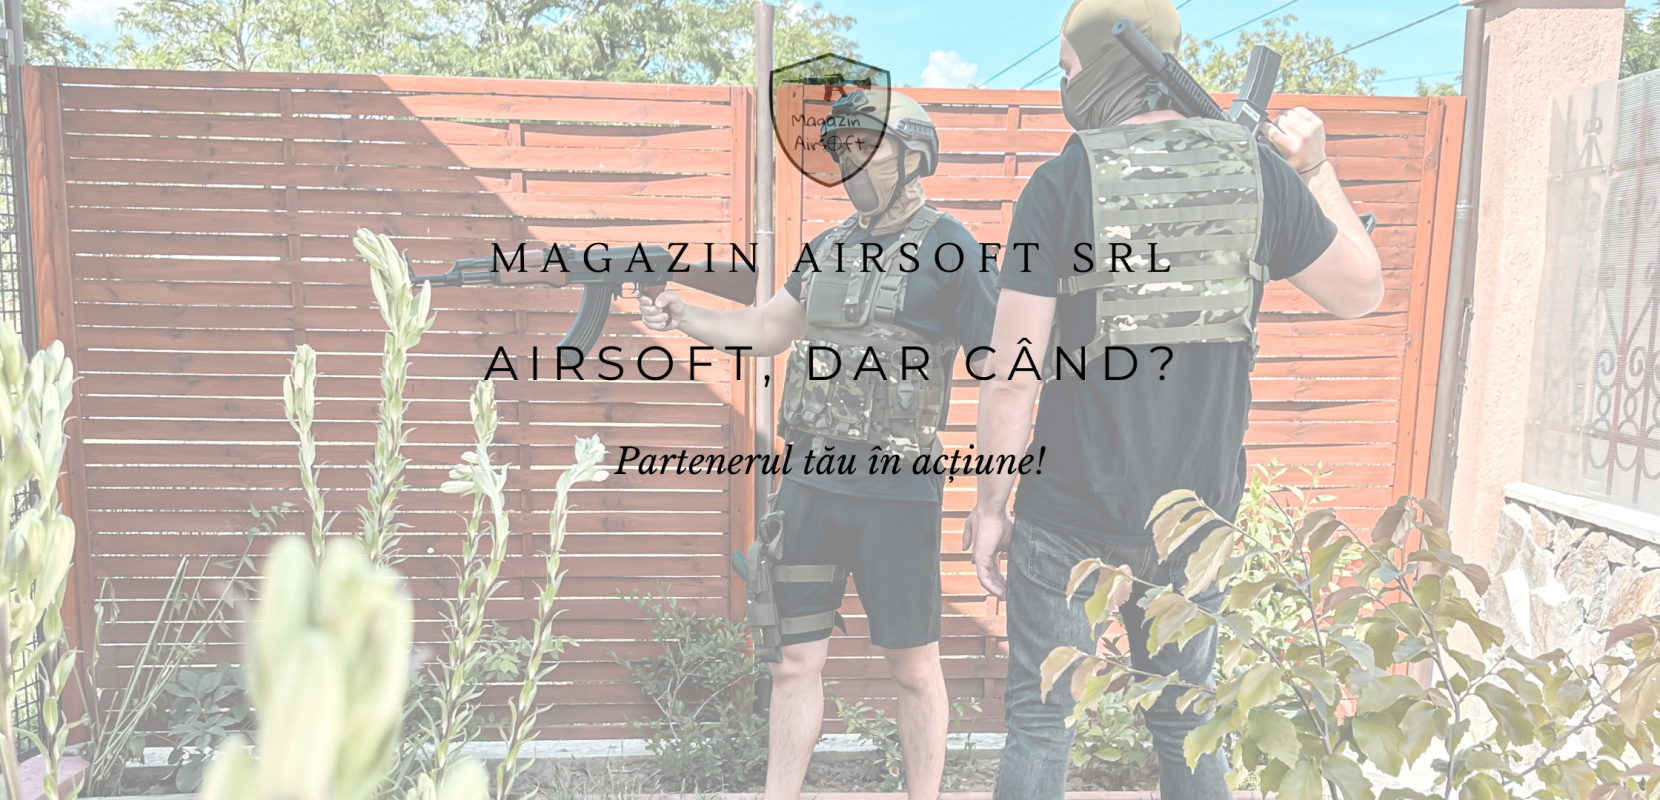 Airsoft, dar cand?